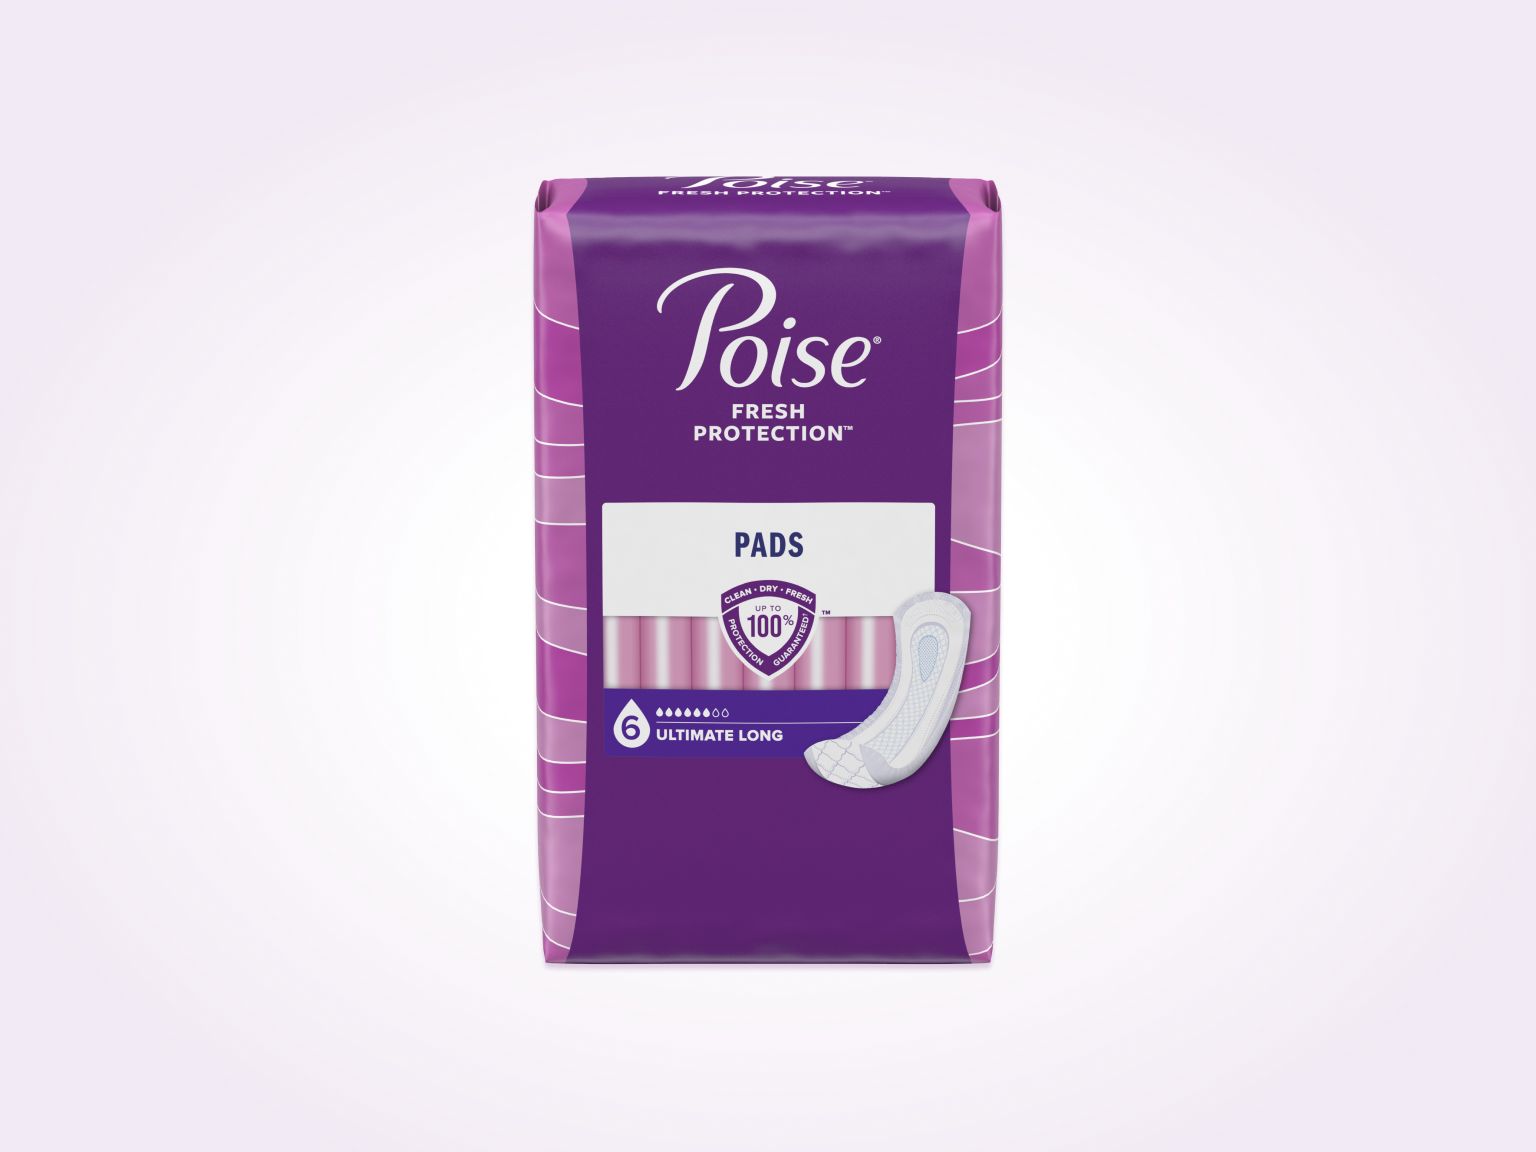 Poise Ultimate Absorbency Day/Night Incontinence Pads Long Length